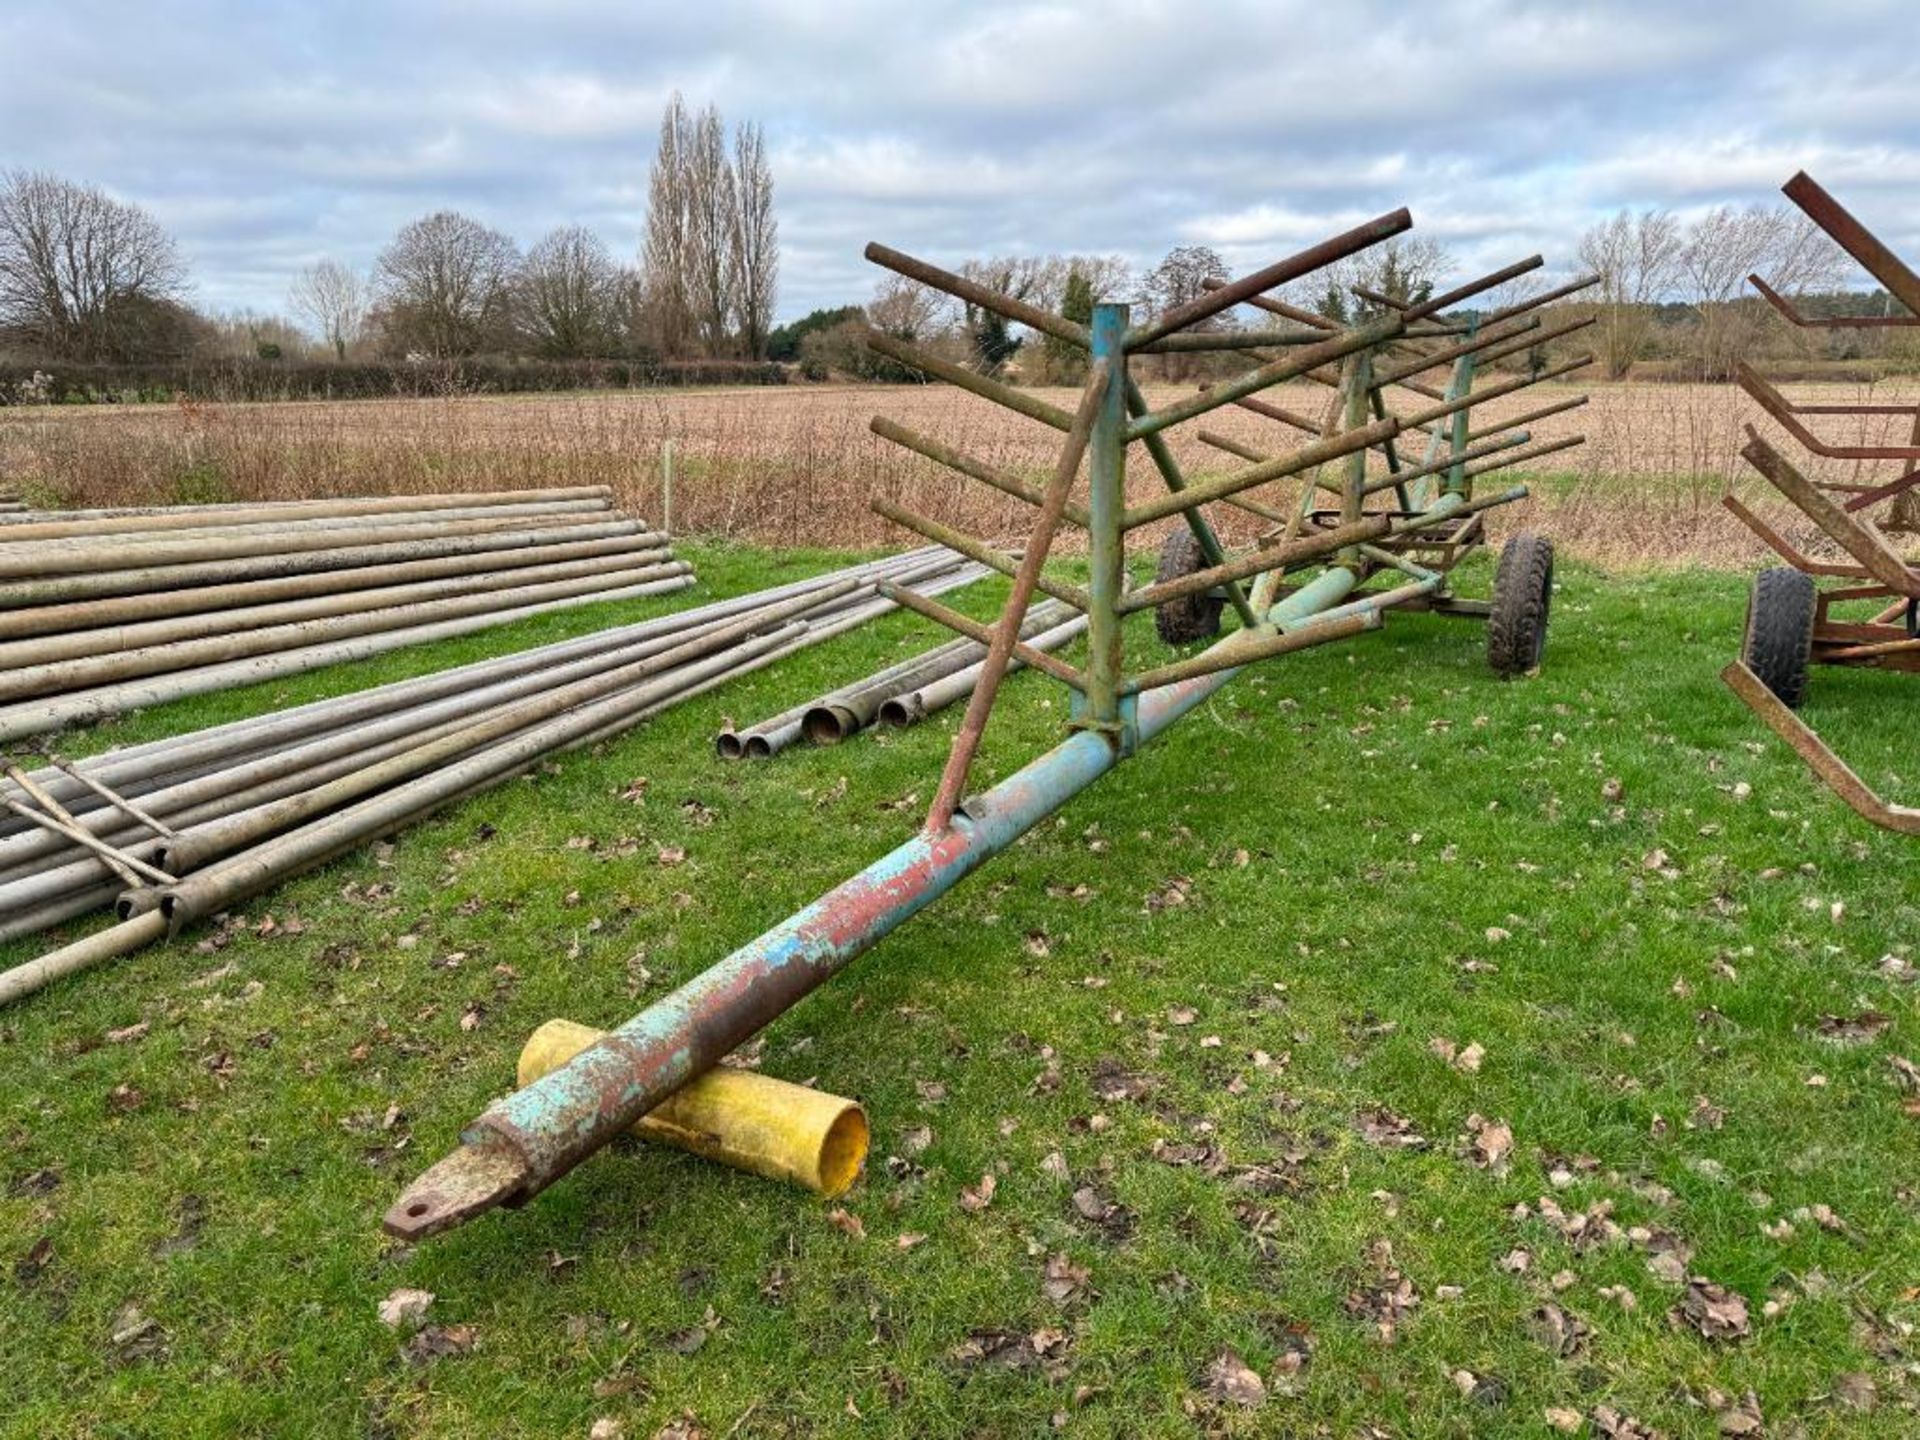 Irrigation pipe trailer, single axle - Image 2 of 3